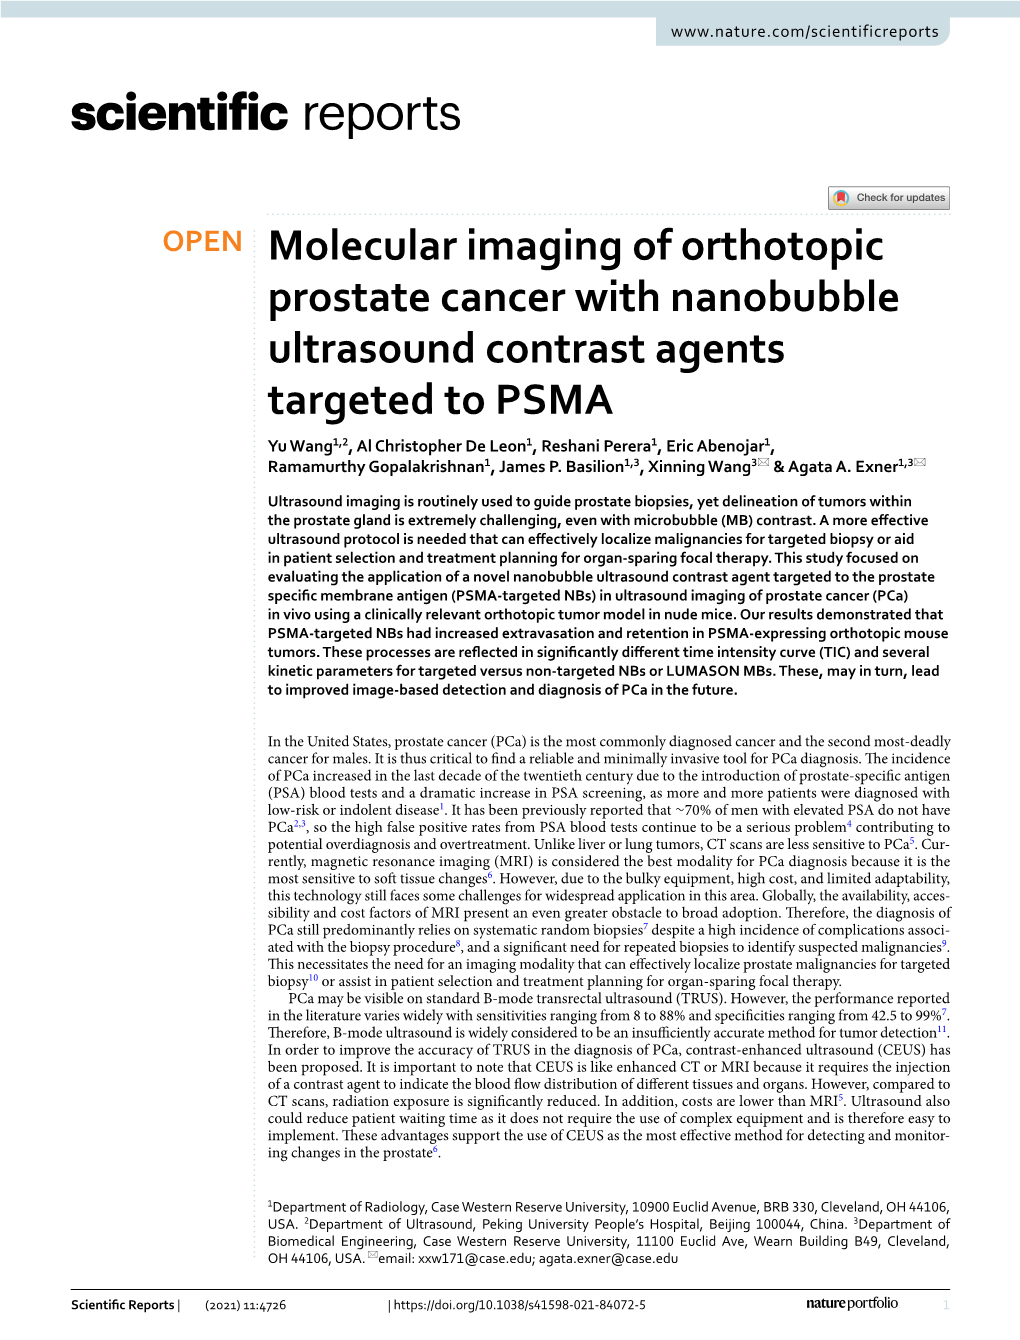 Molecular Imaging of Orthotopic Prostate Cancer with Nanobubble Ultrasound Contrast Agents Targeted to PSMA